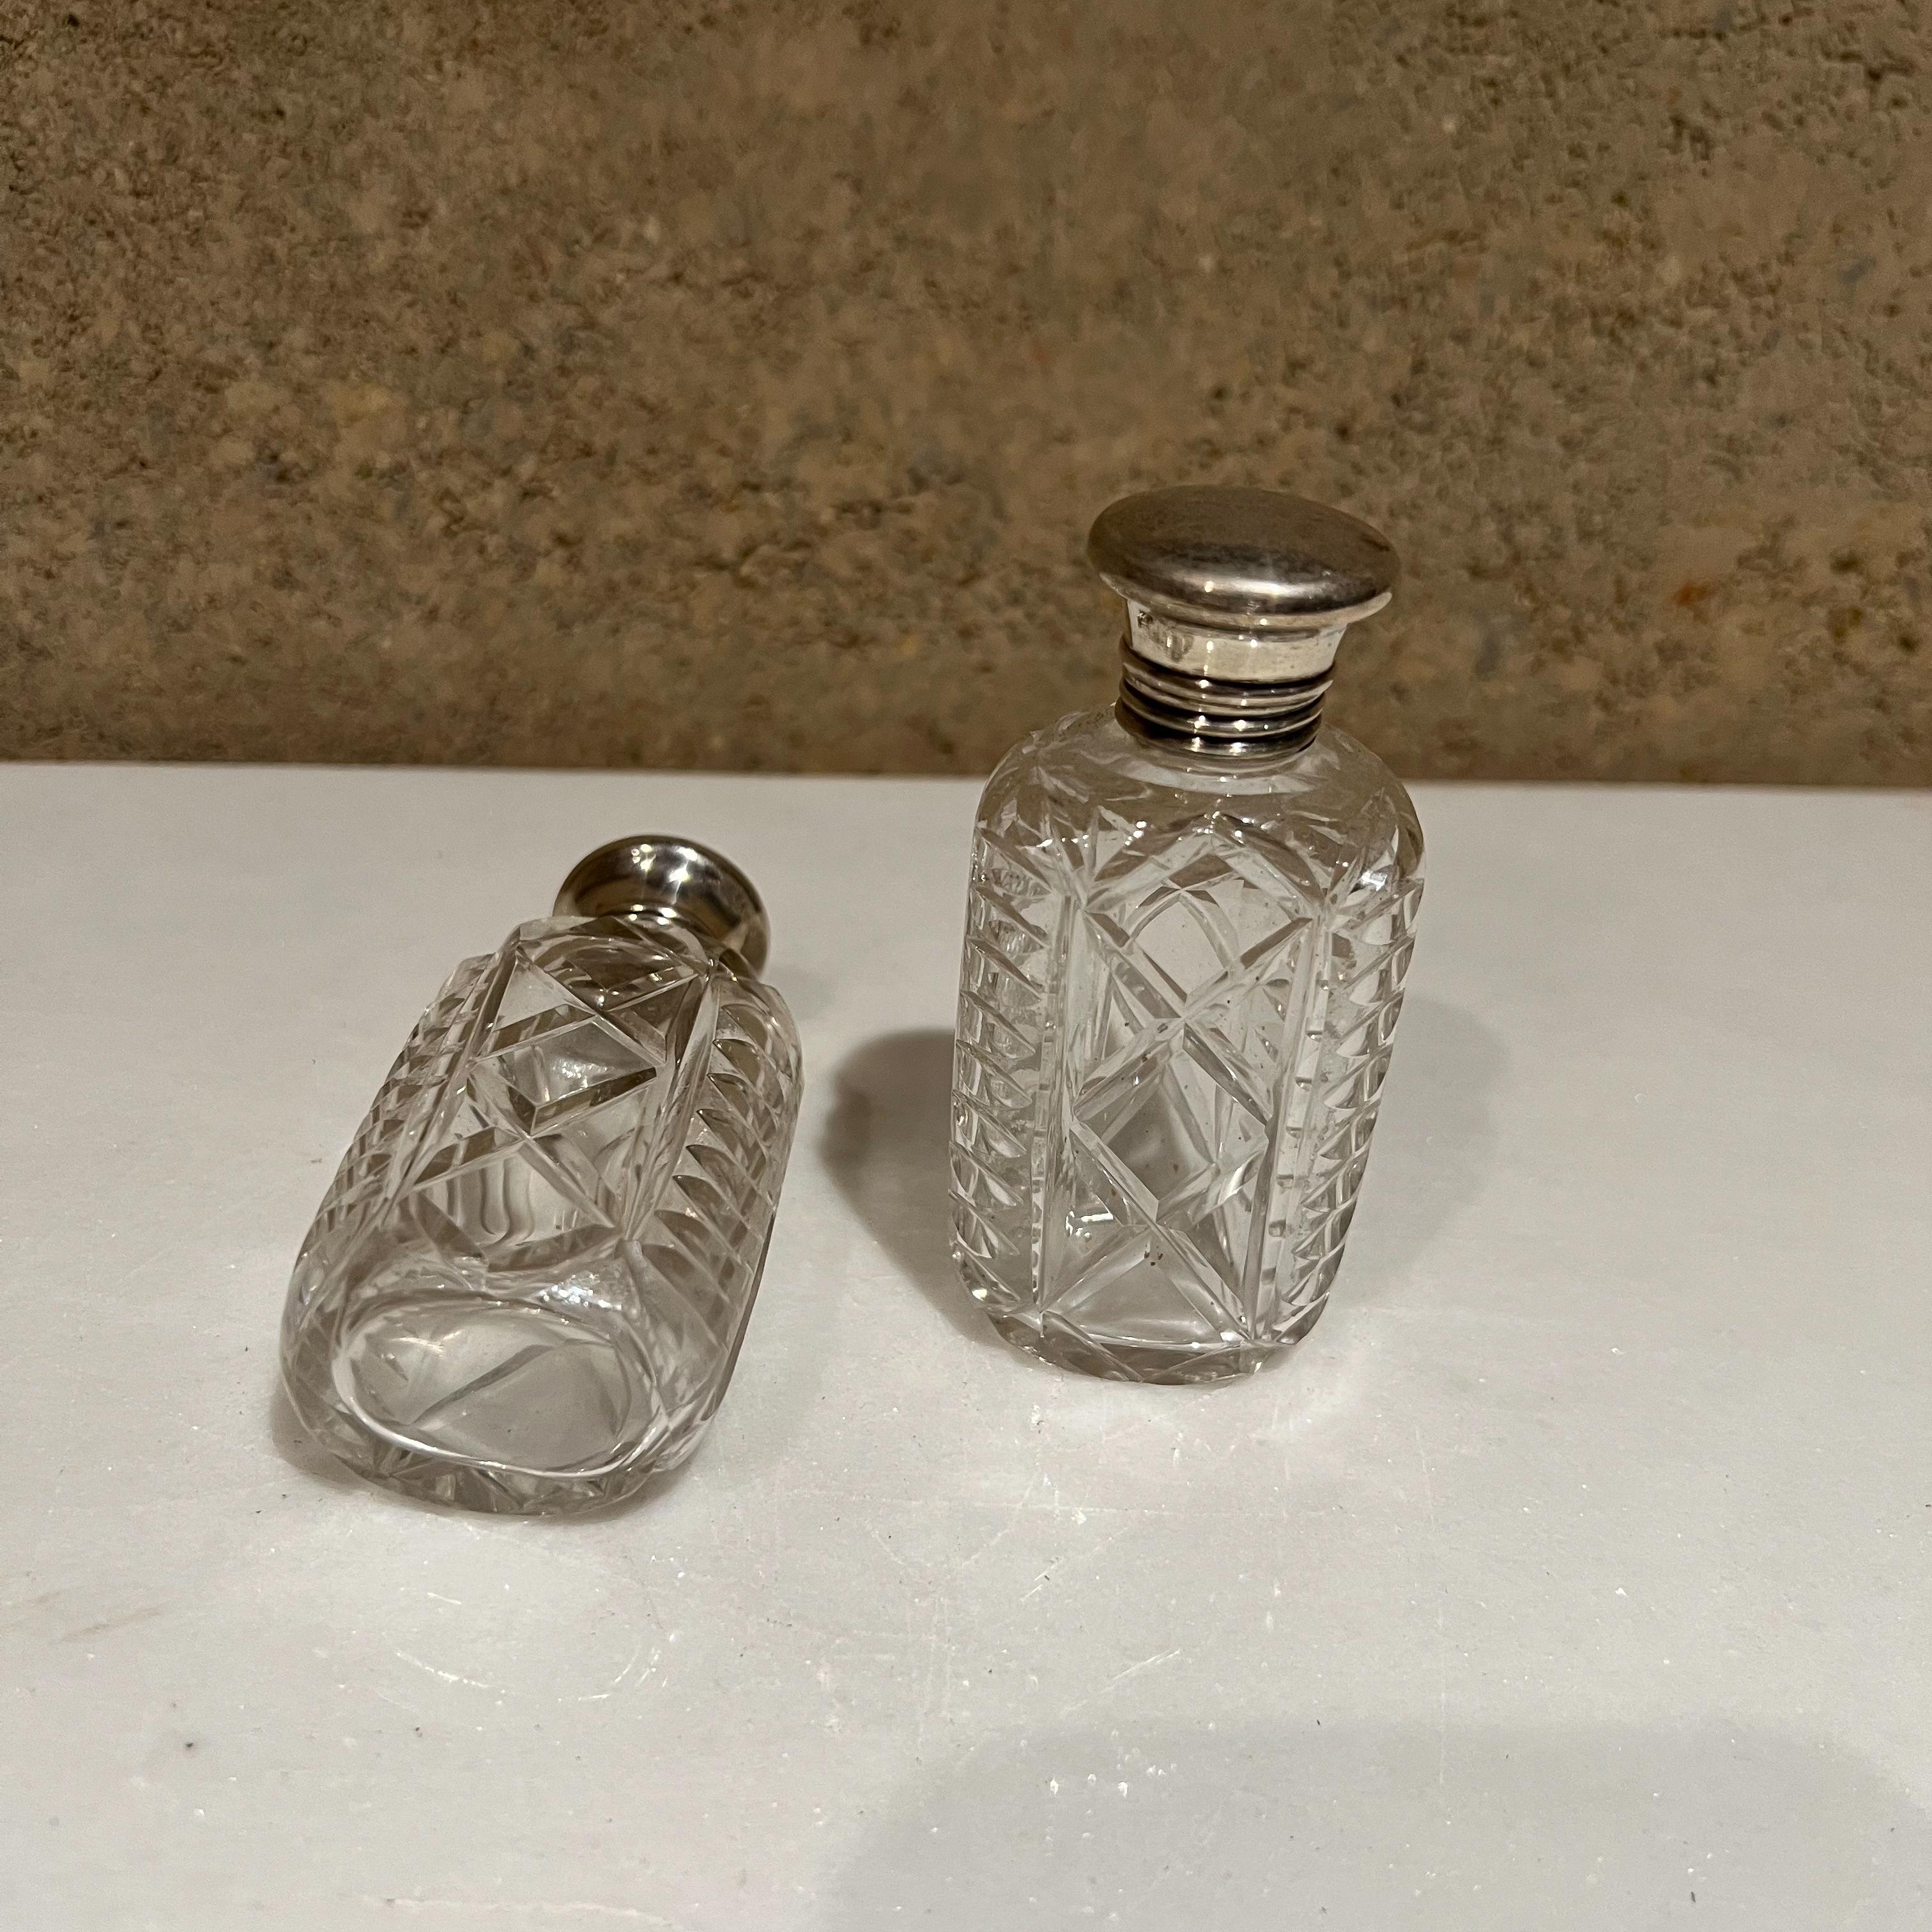 Mid-20th Century 1940s Elegant Antique Vanity Bottle Jars in Cut Glass Silver Plated Caps